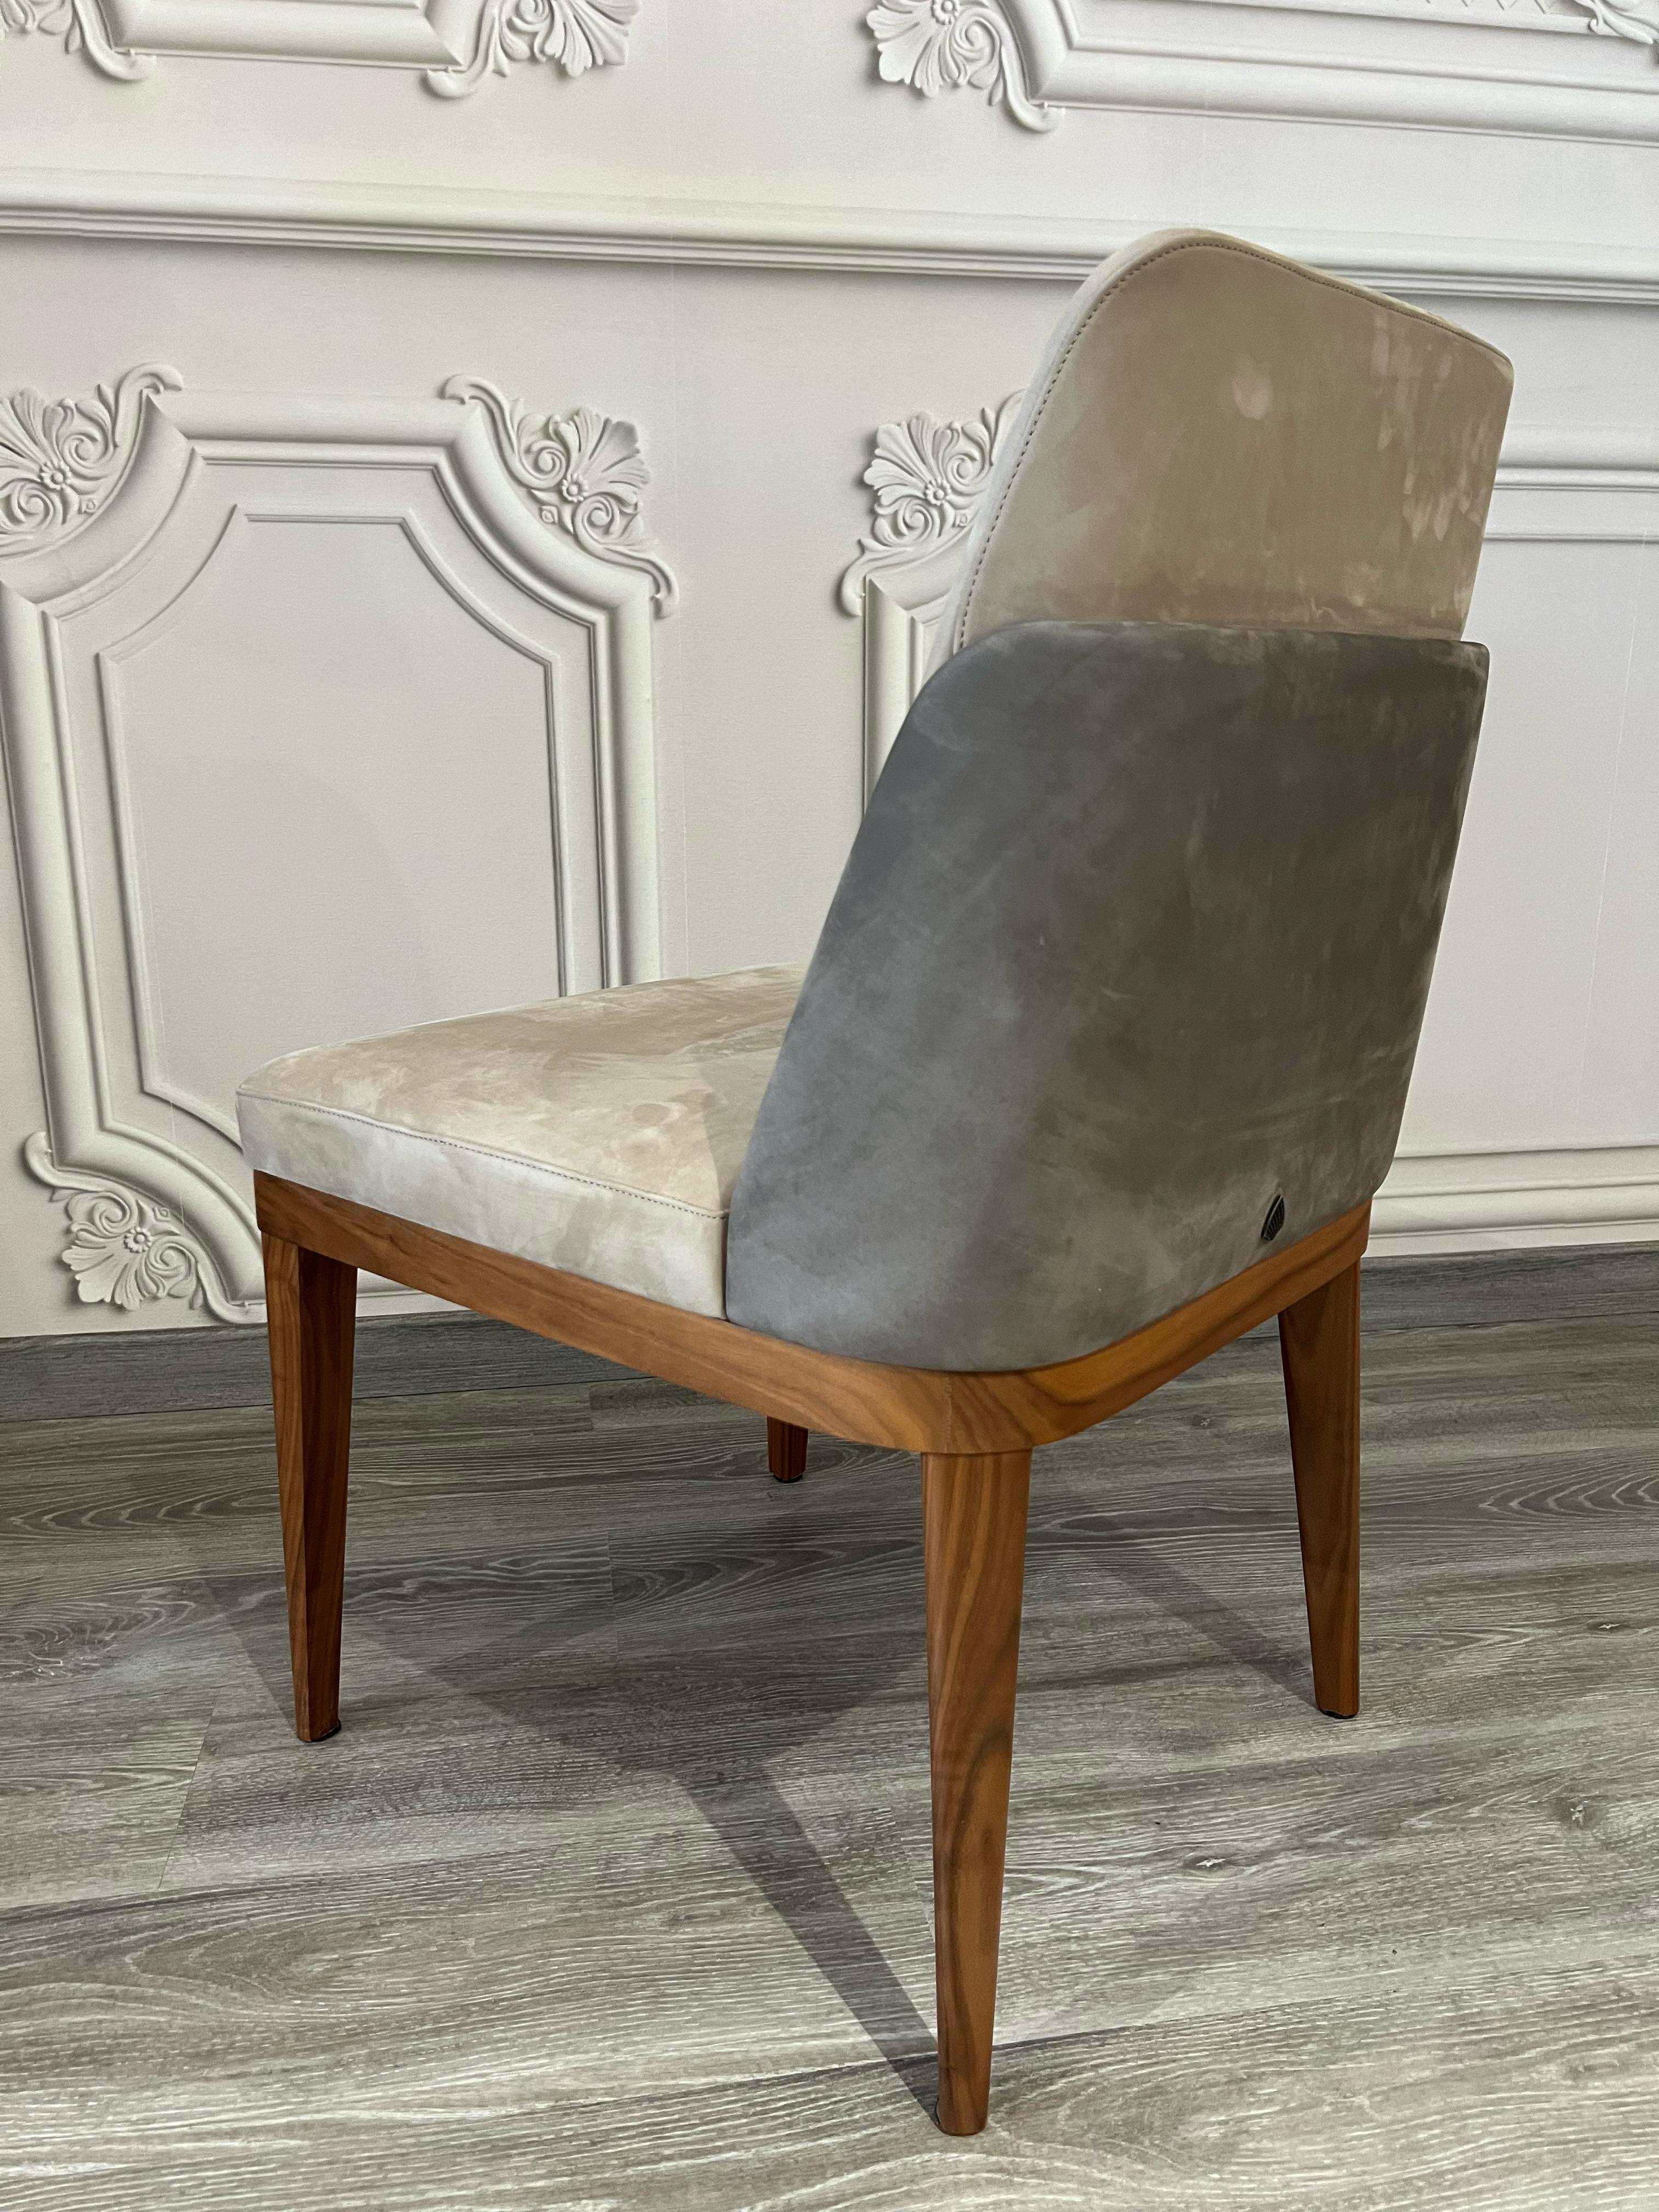 Nora nubuck leather and American walnut wood dining chair For Sale 1